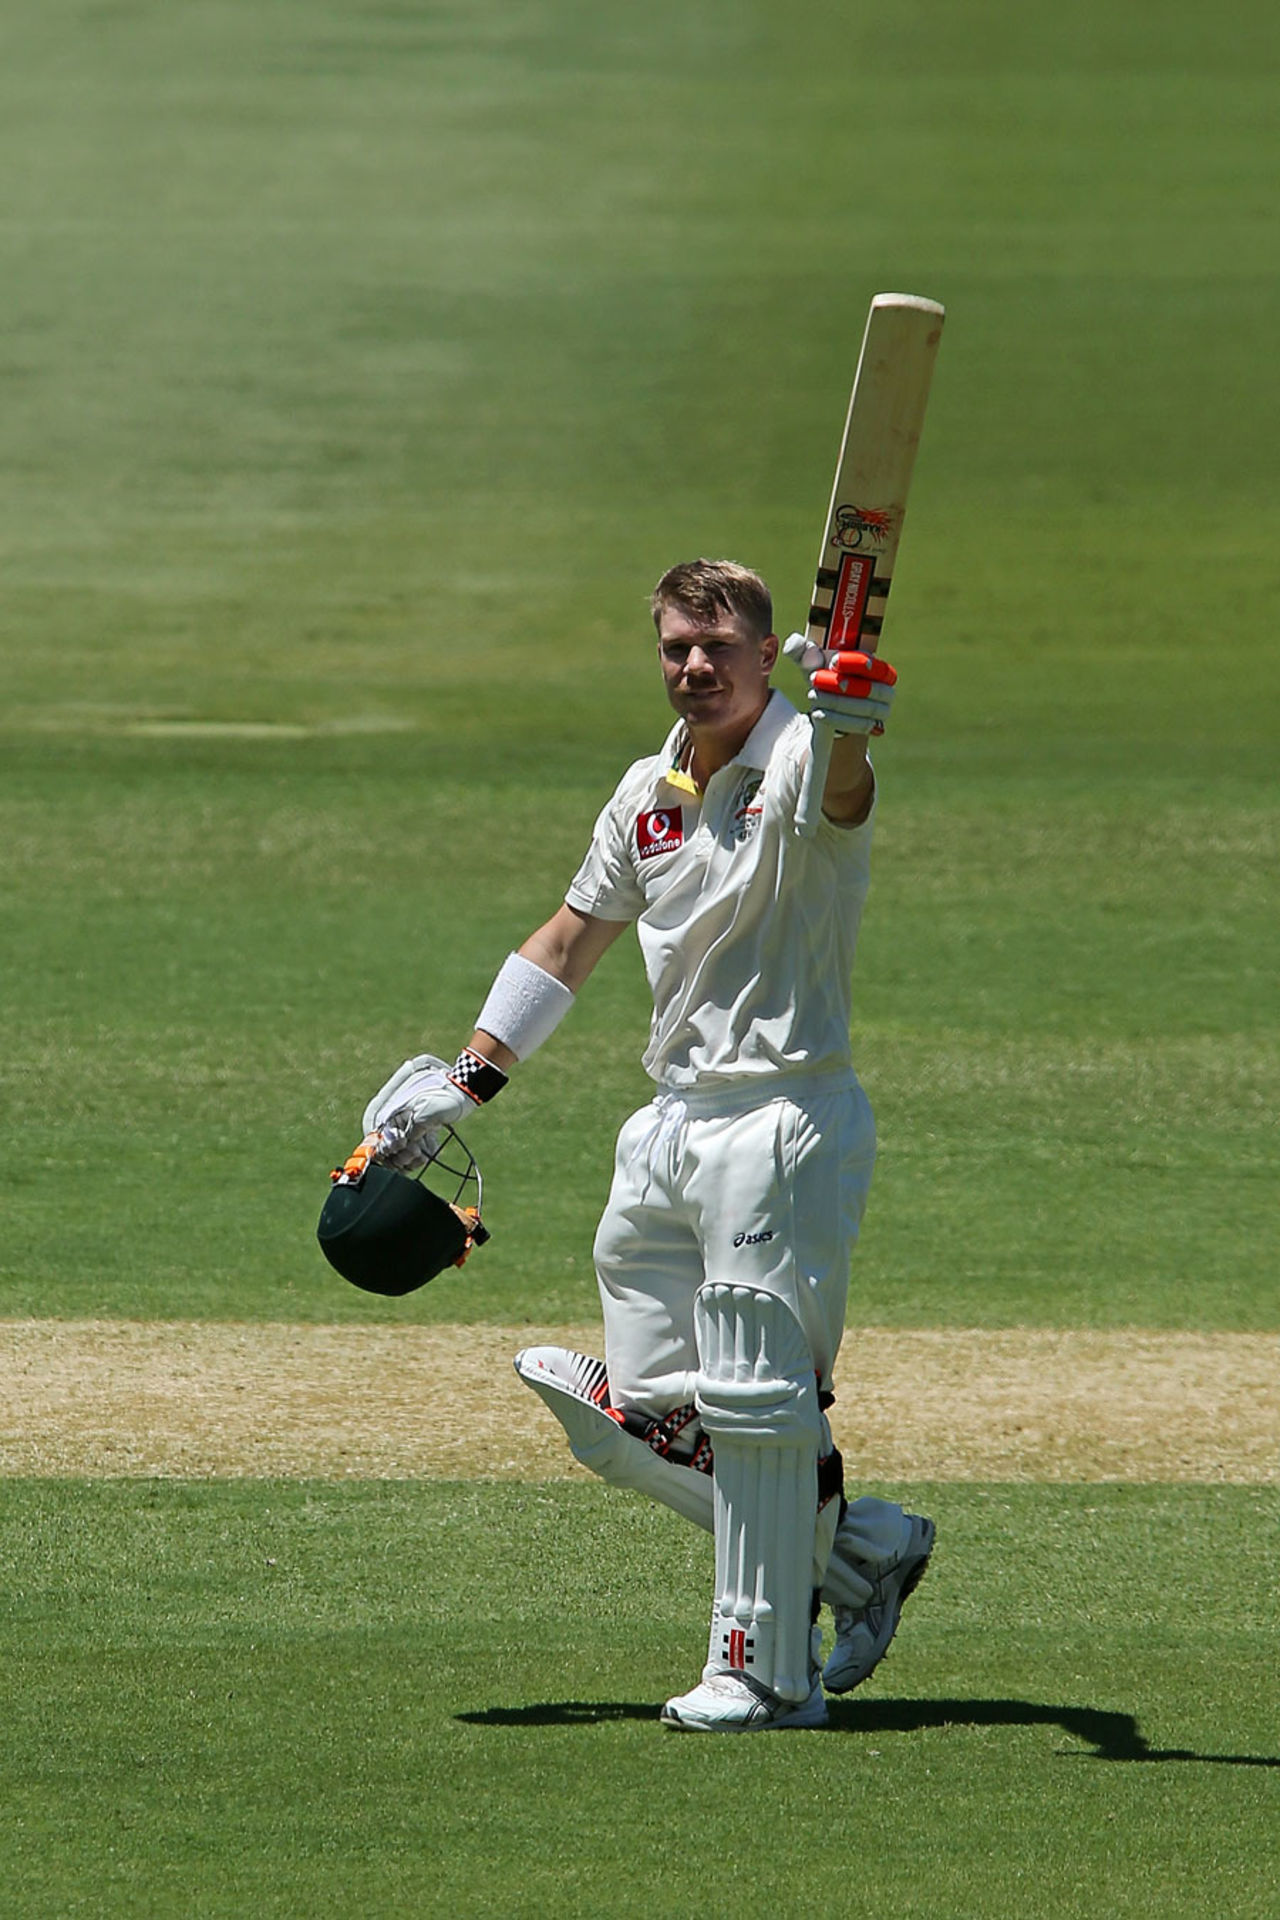 David Warner acknowledges the applause after his ton, Australia v South Africa, 2nd Test, Adelaide, 1st day, November 22, 2012